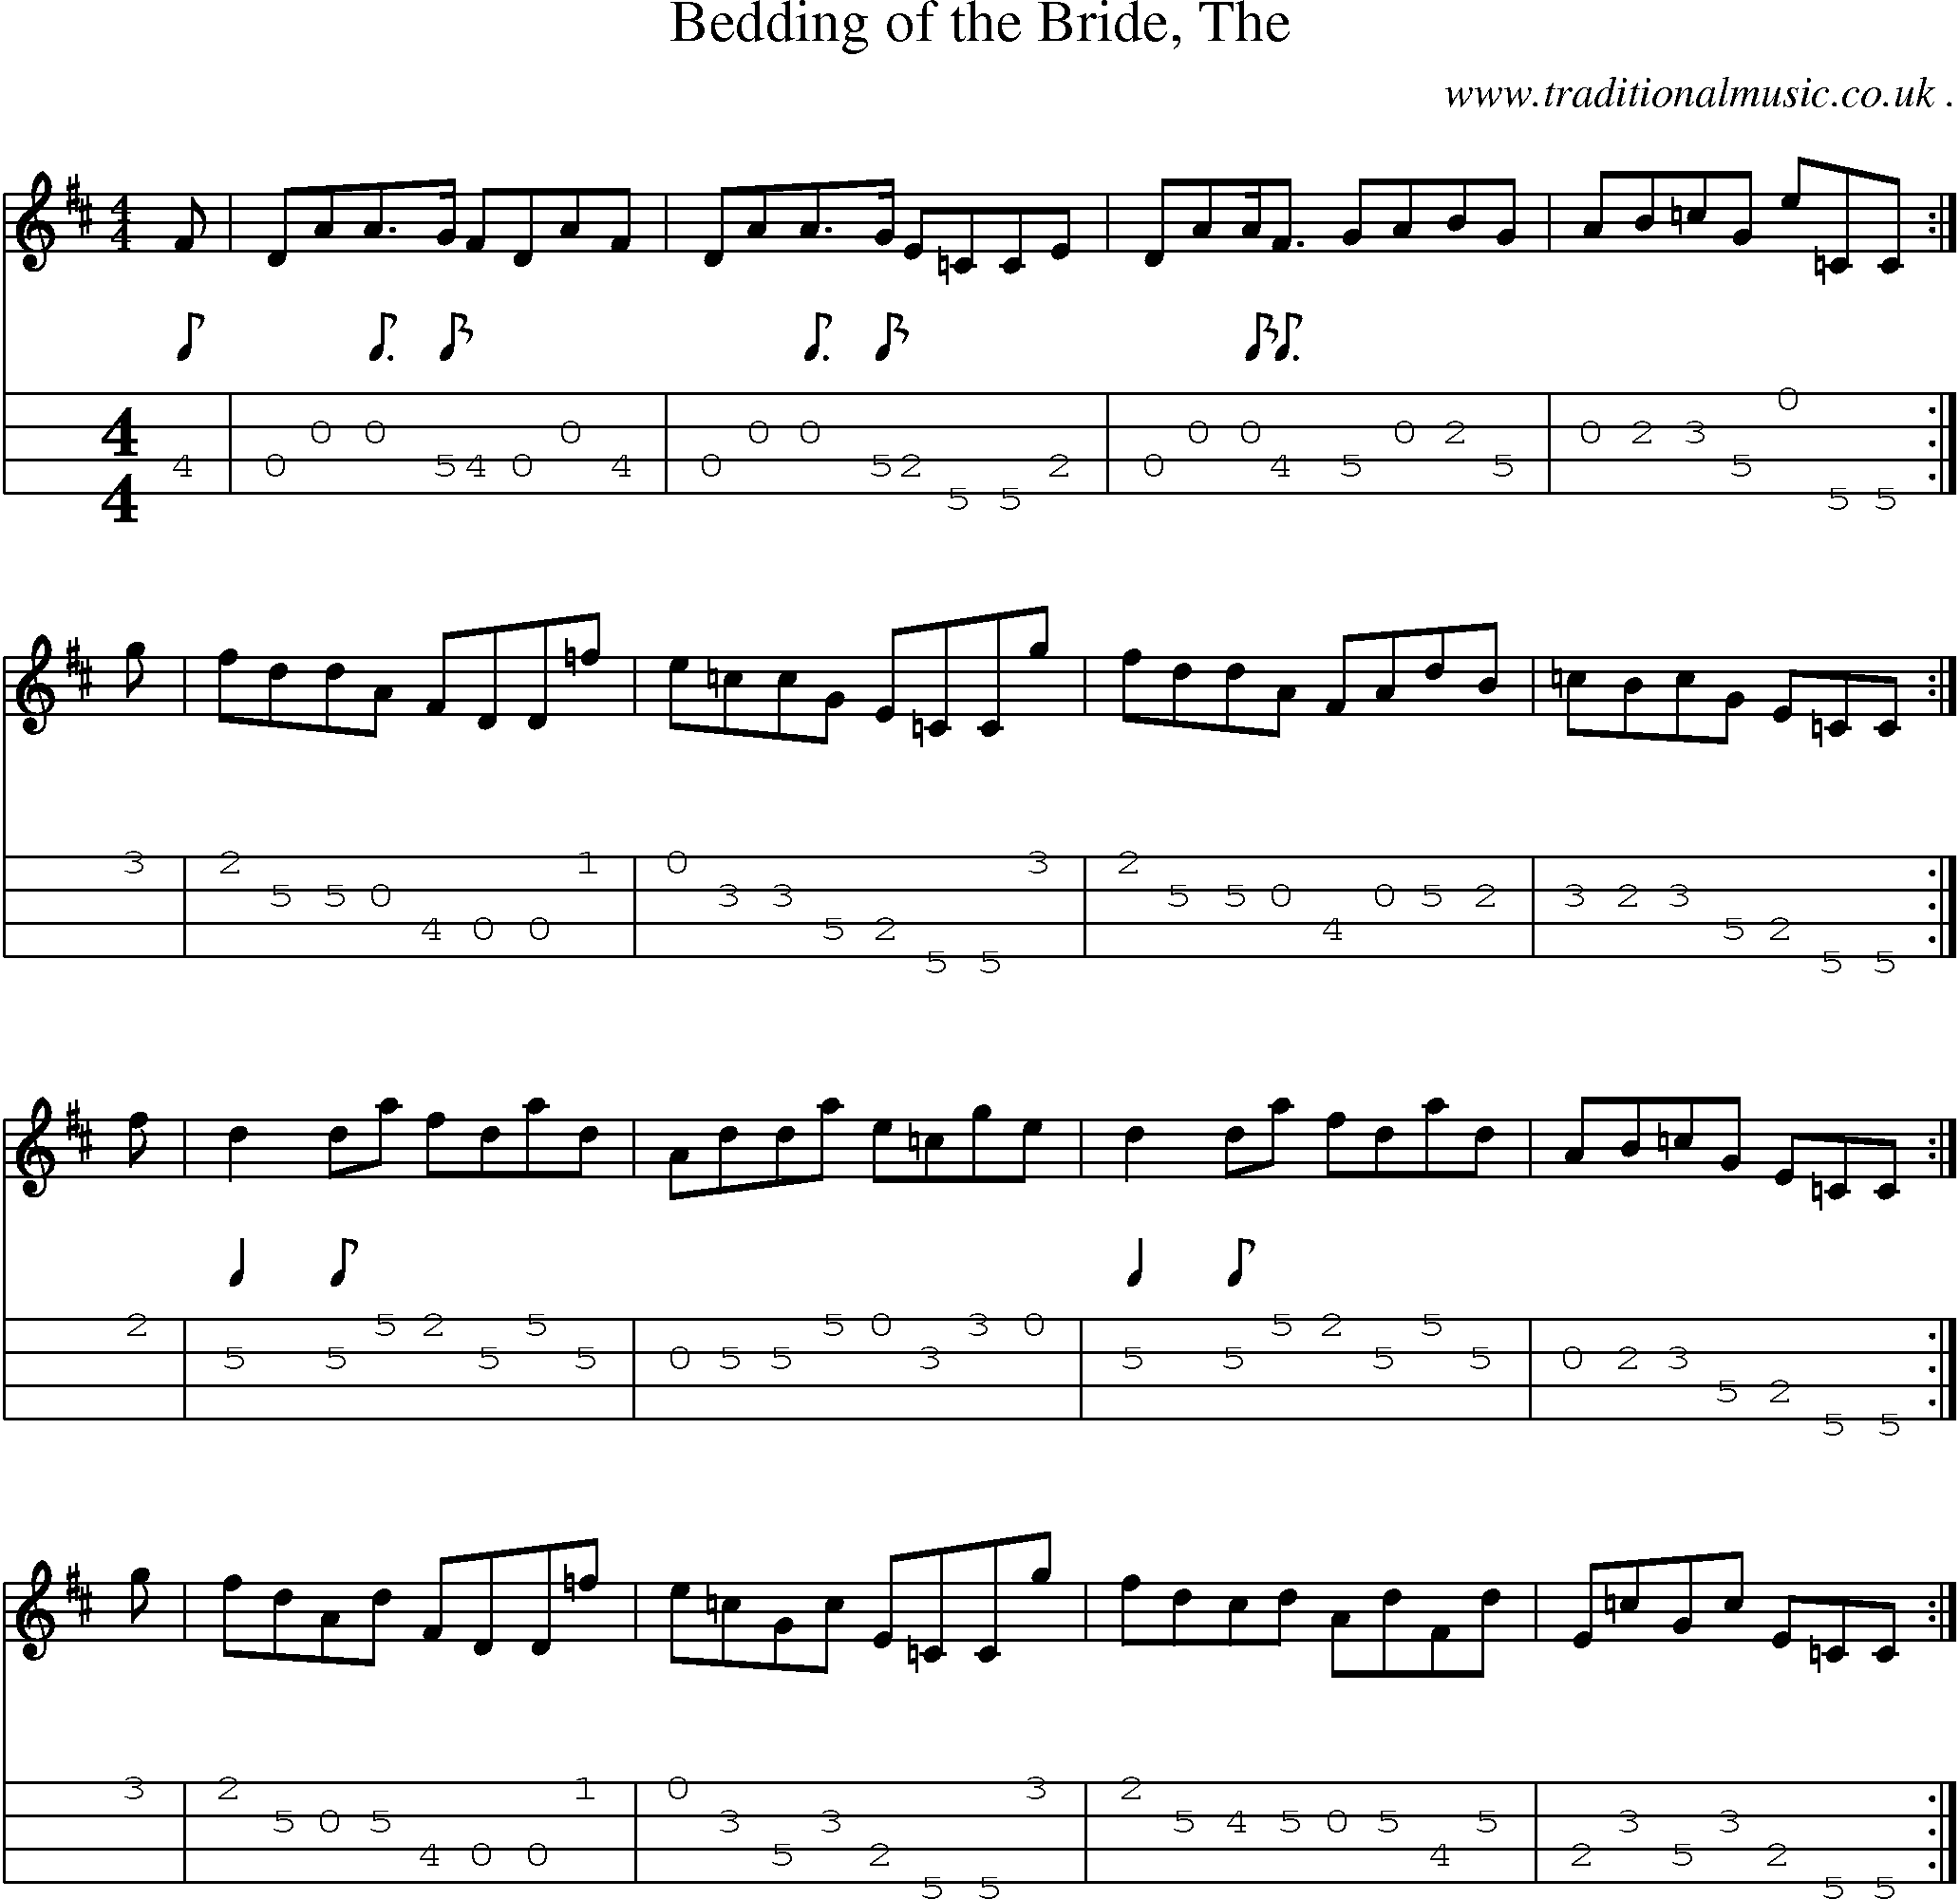 Sheet-music  score, Chords and Mandolin Tabs for Bedding Of The Bride The